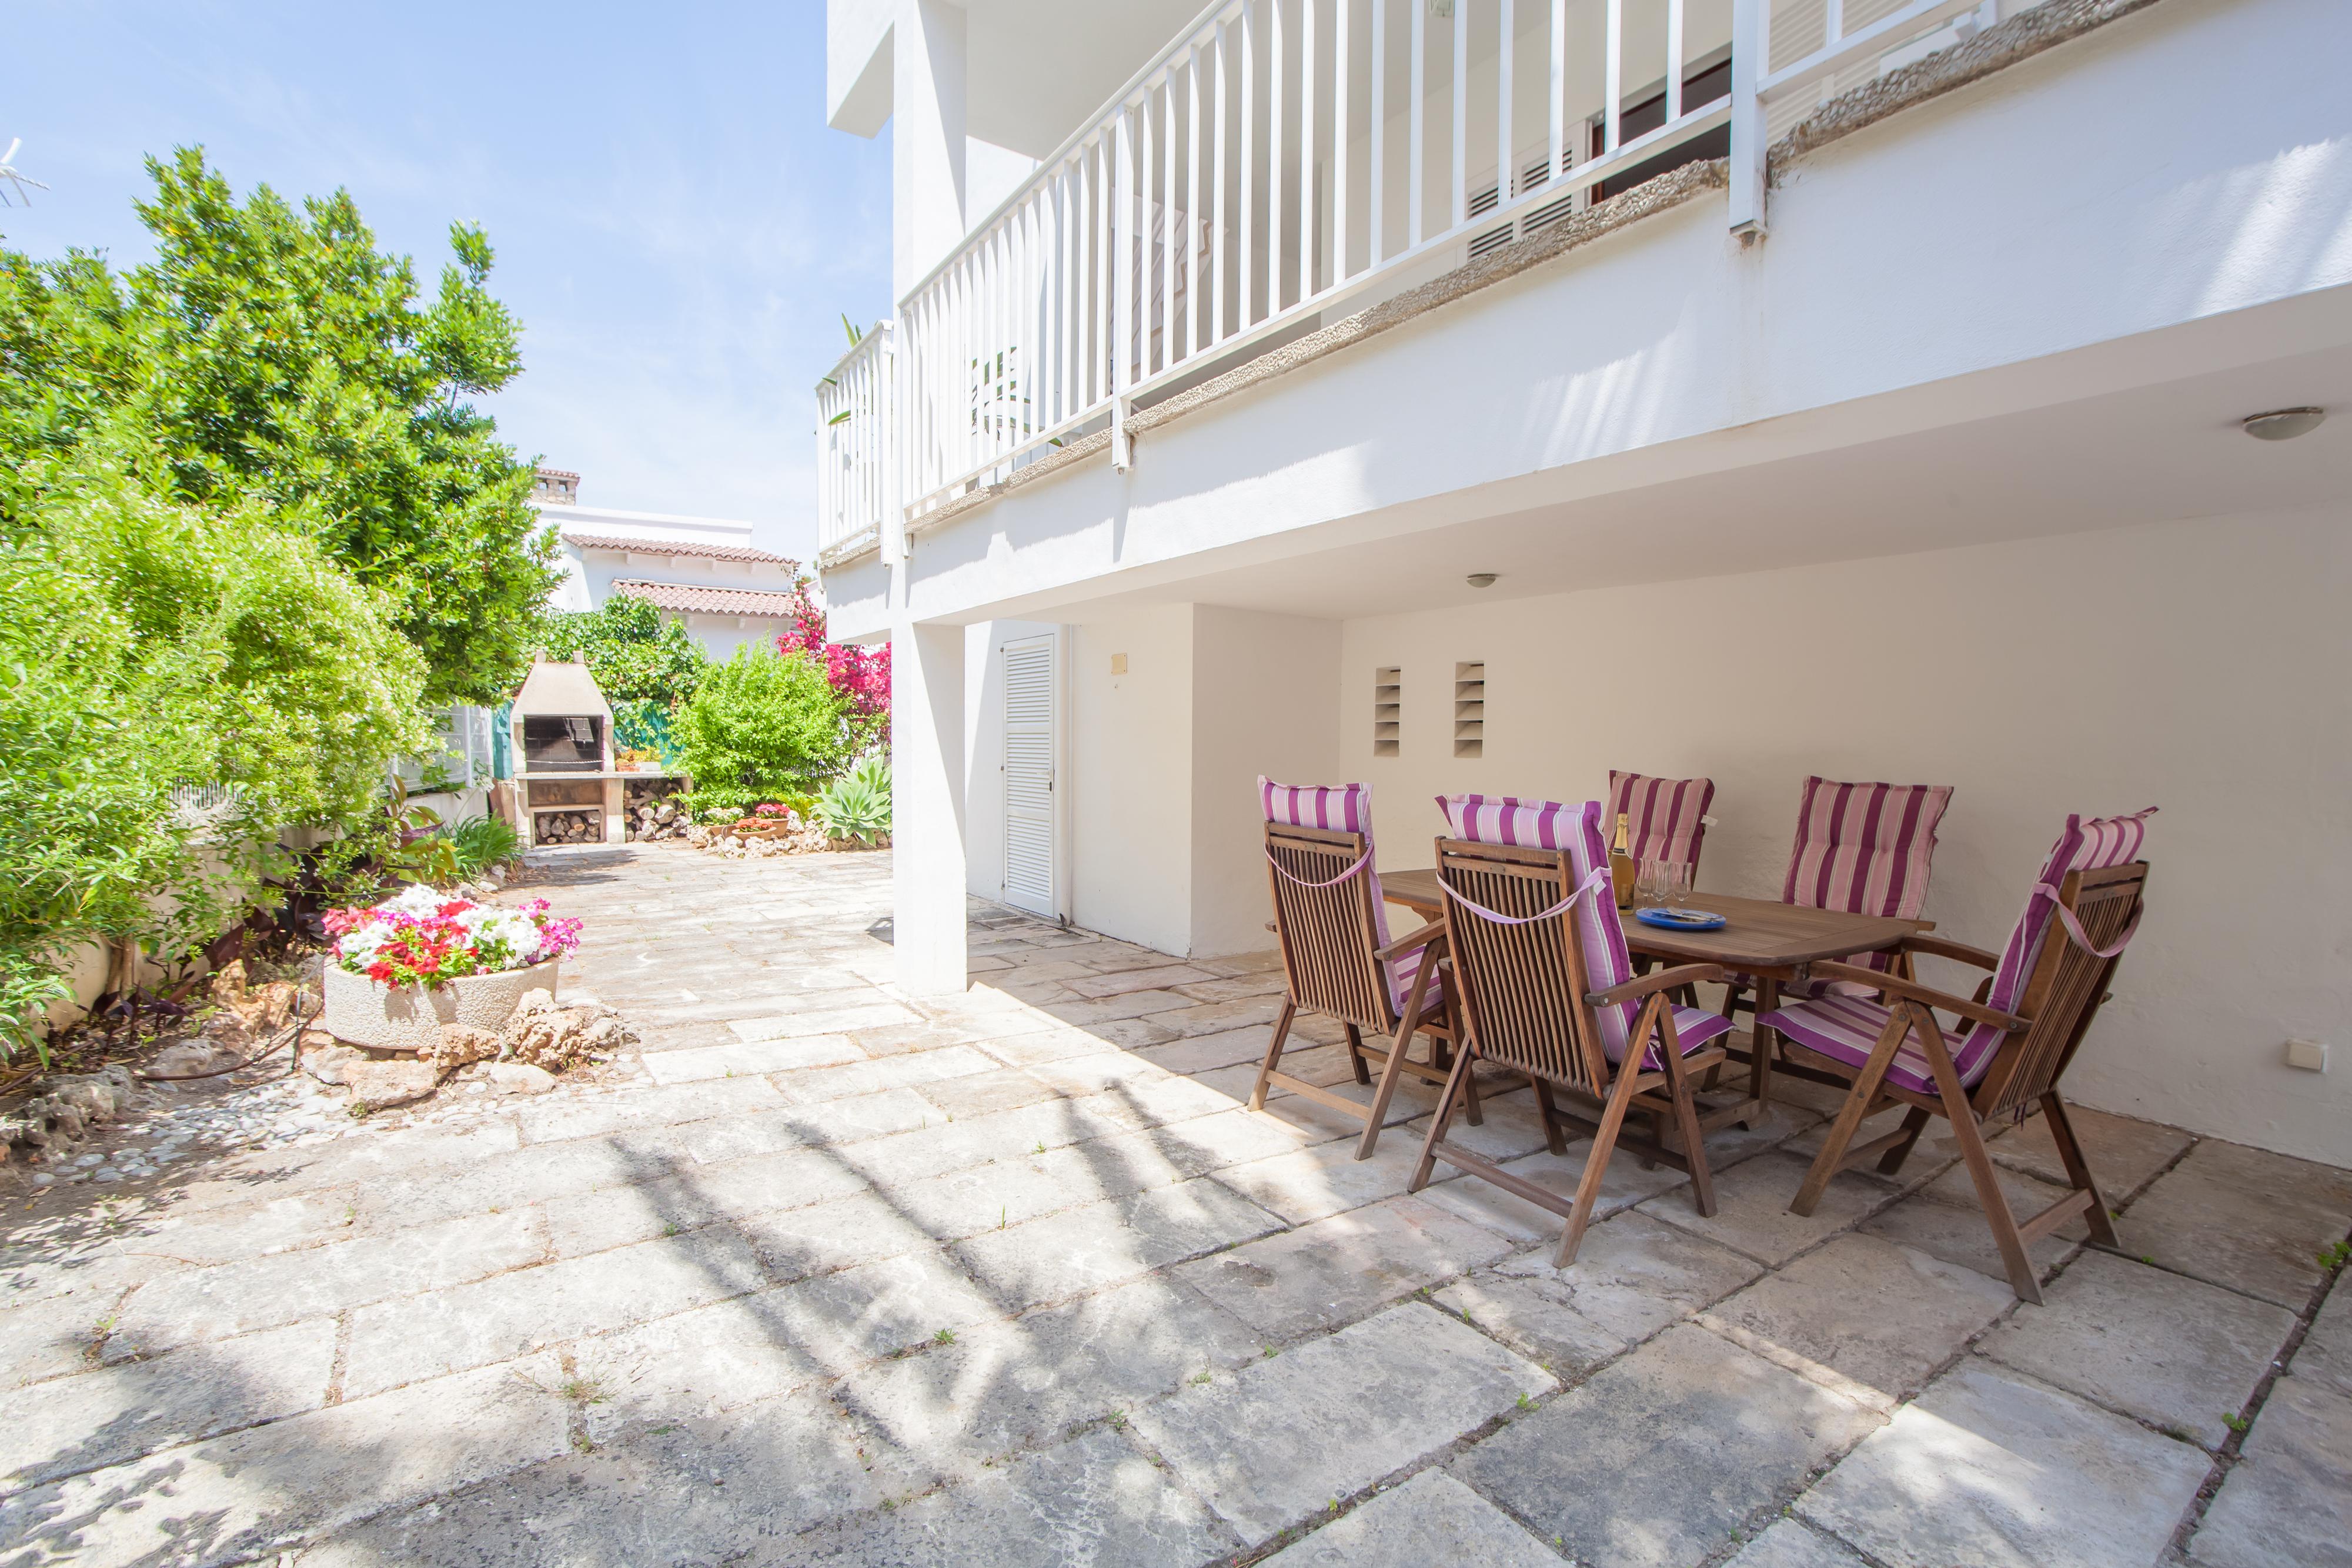 Property Image 2 - CAN MIQUELET - Apartment with sea views in PORT D’ALCUDIA. Free WiFi